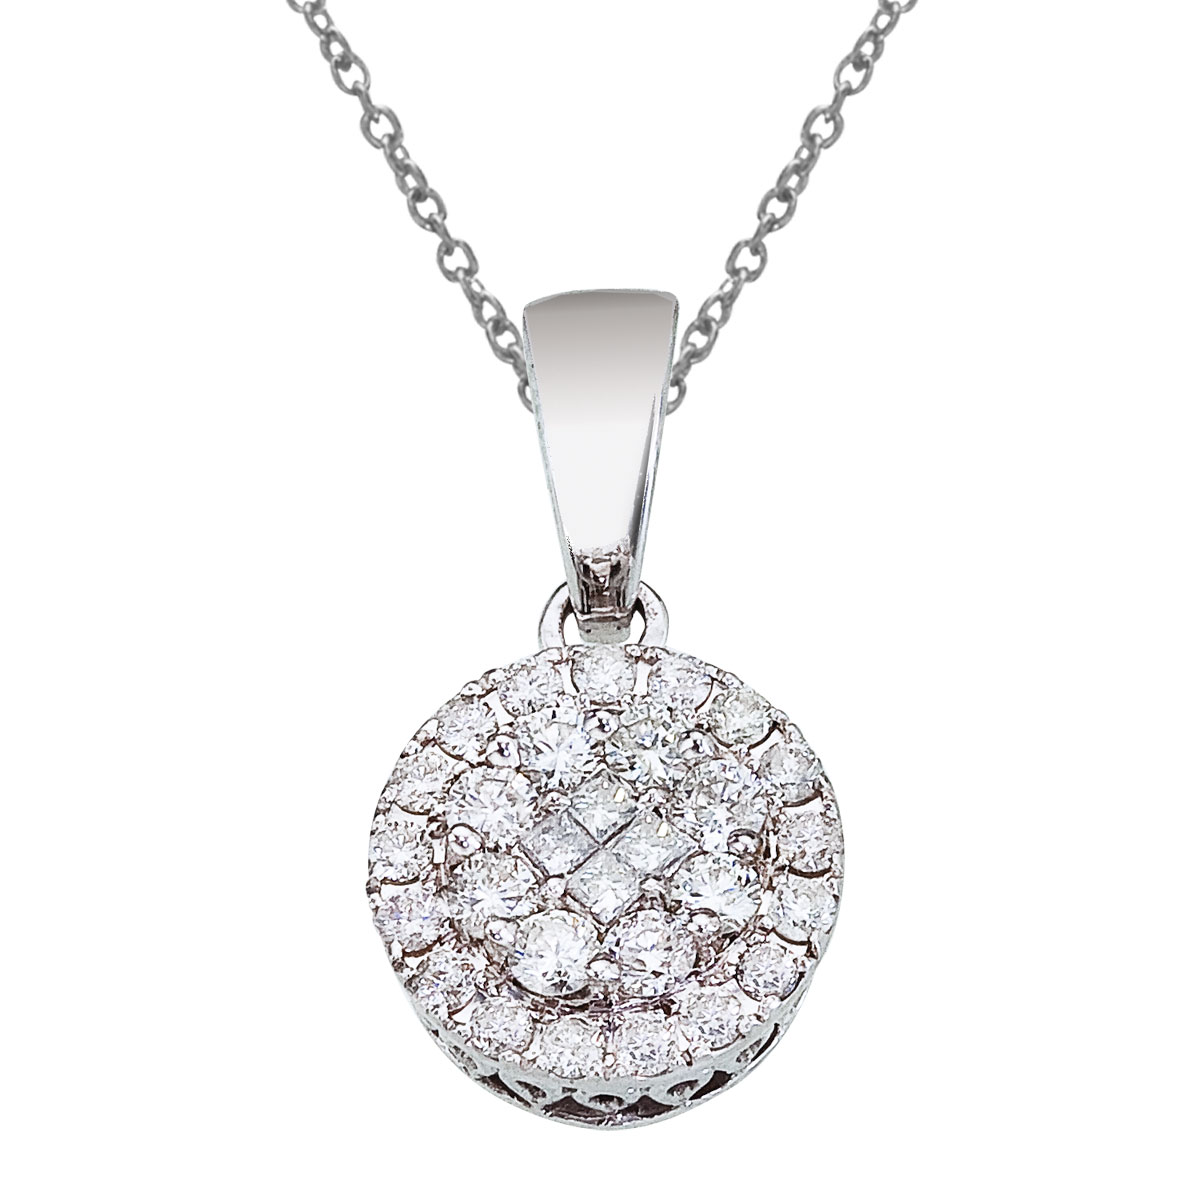 JCX2951: .50 total carat diamond Clustaire pendant set in 14k white gold. All the shimmer of a solitaire at an excellent price.